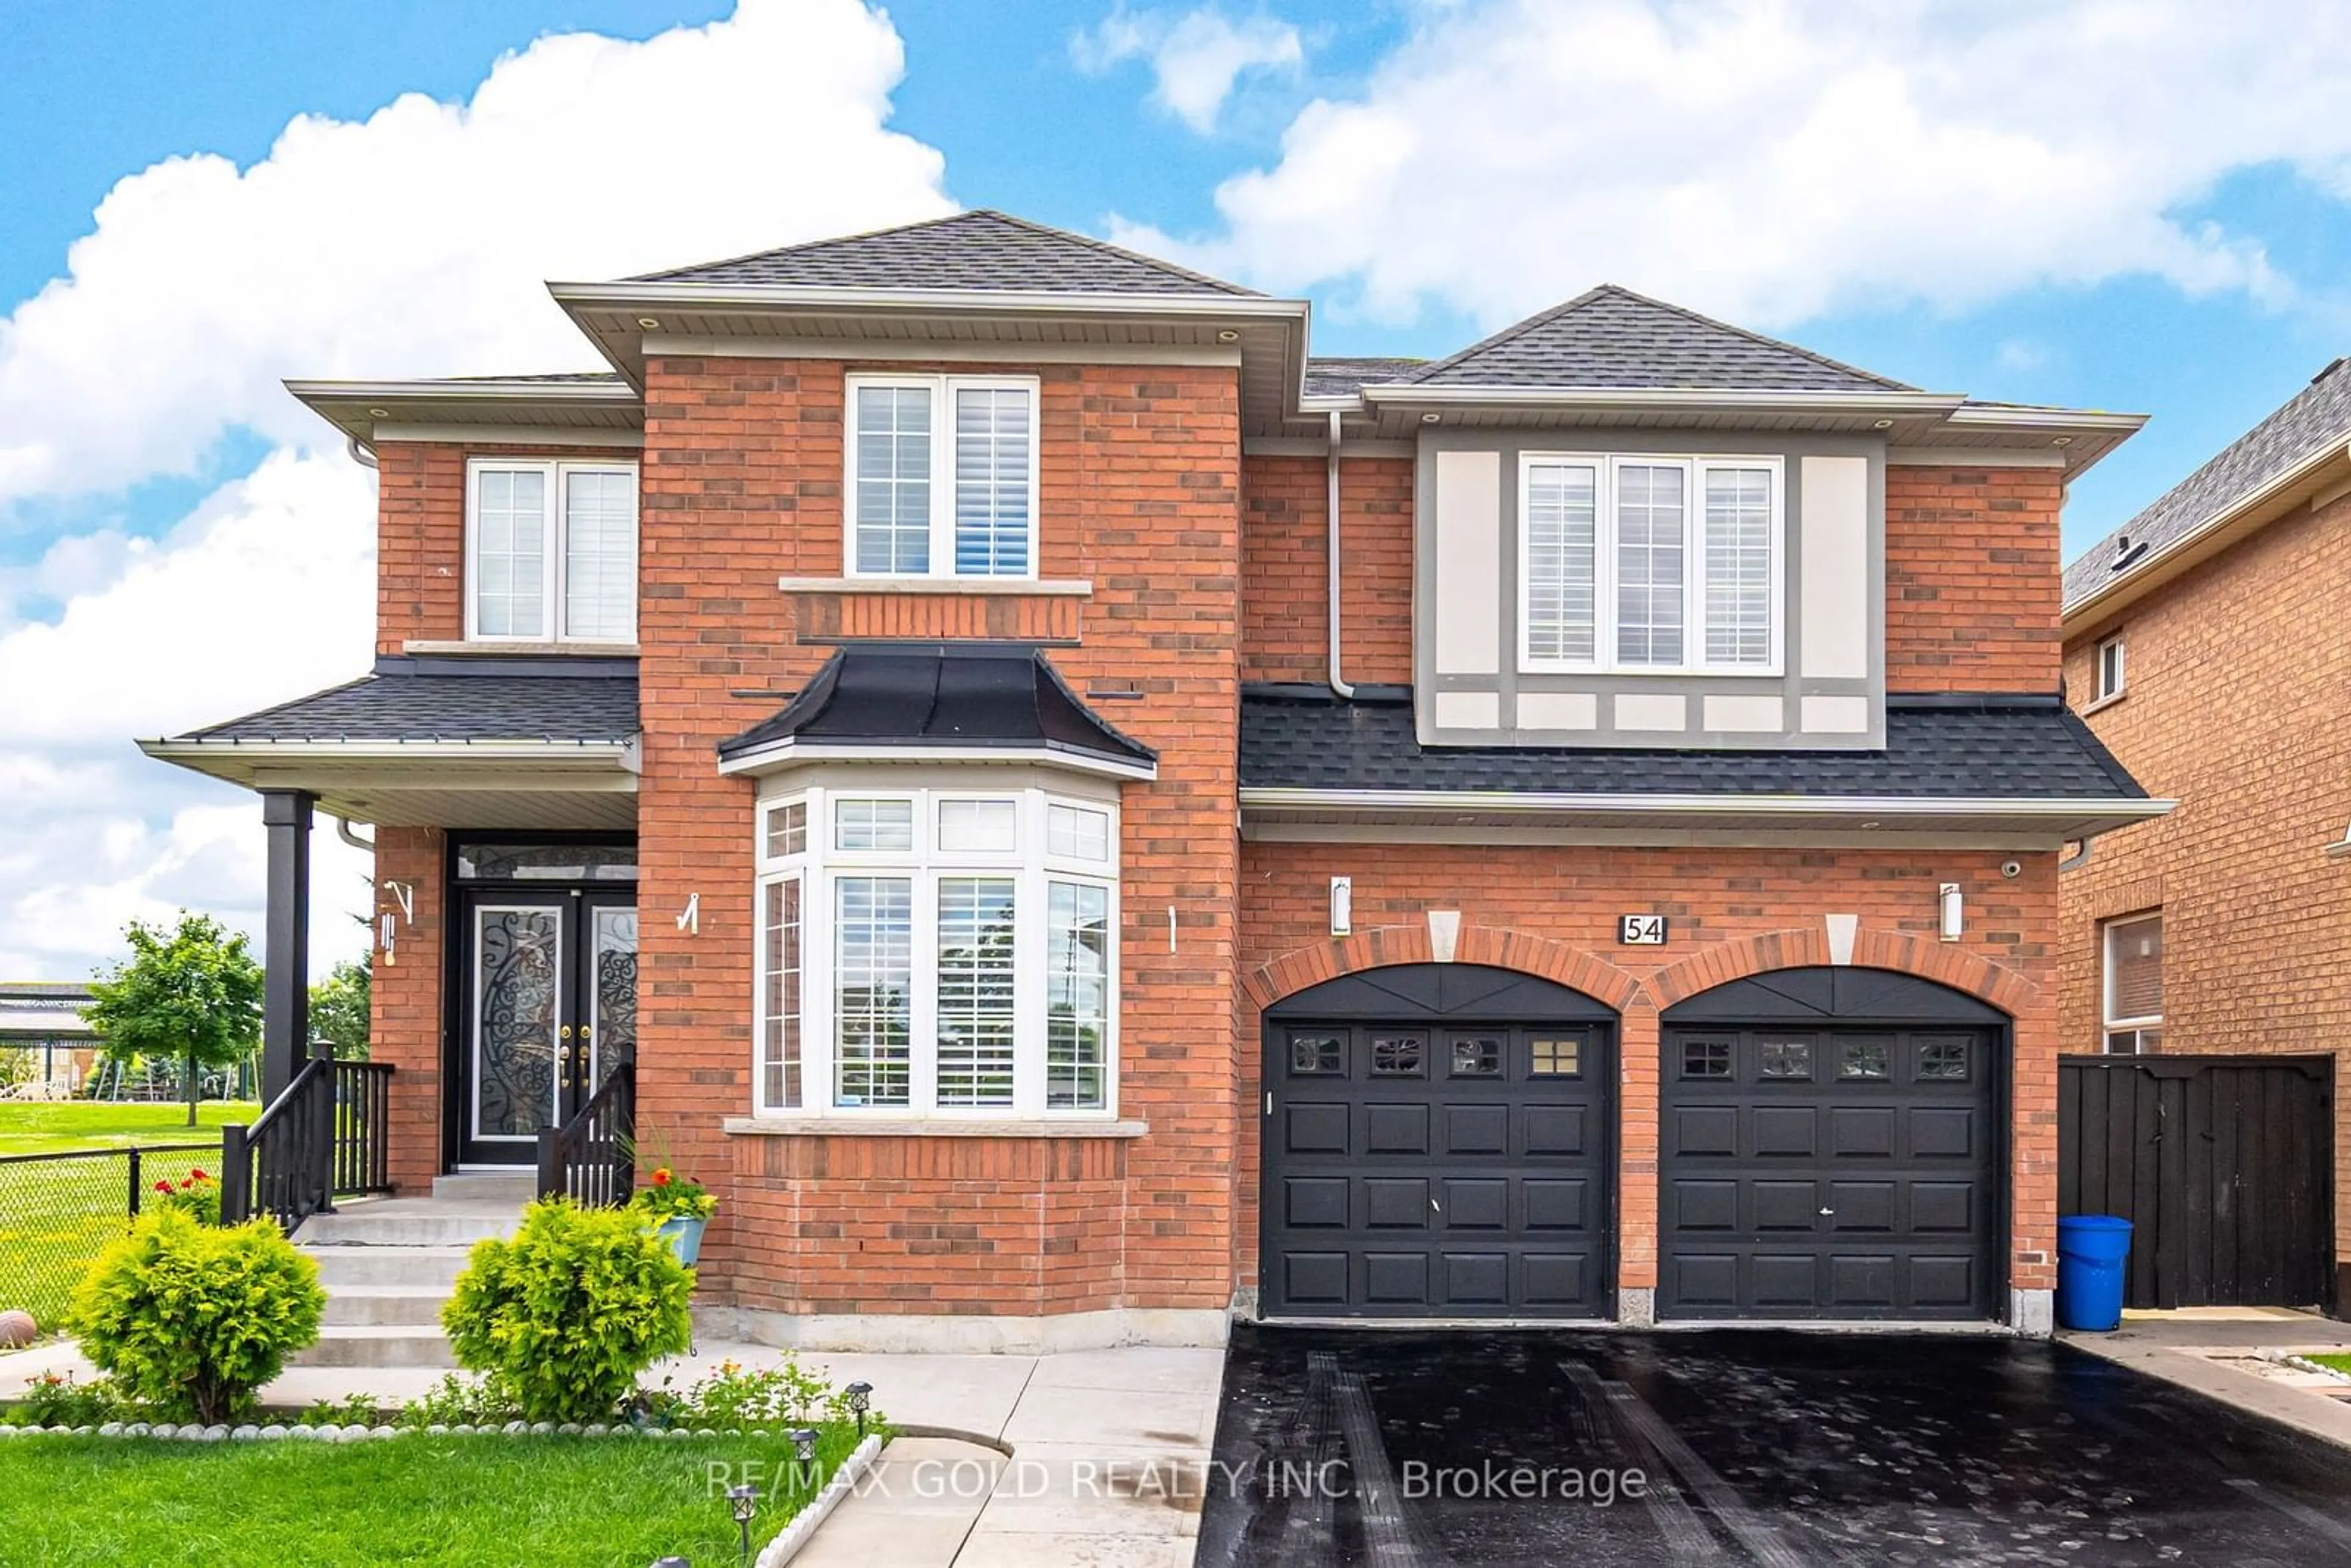 Home with brick exterior material for 54 Quailvalley Dr, Brampton Ontario L6R 0N4